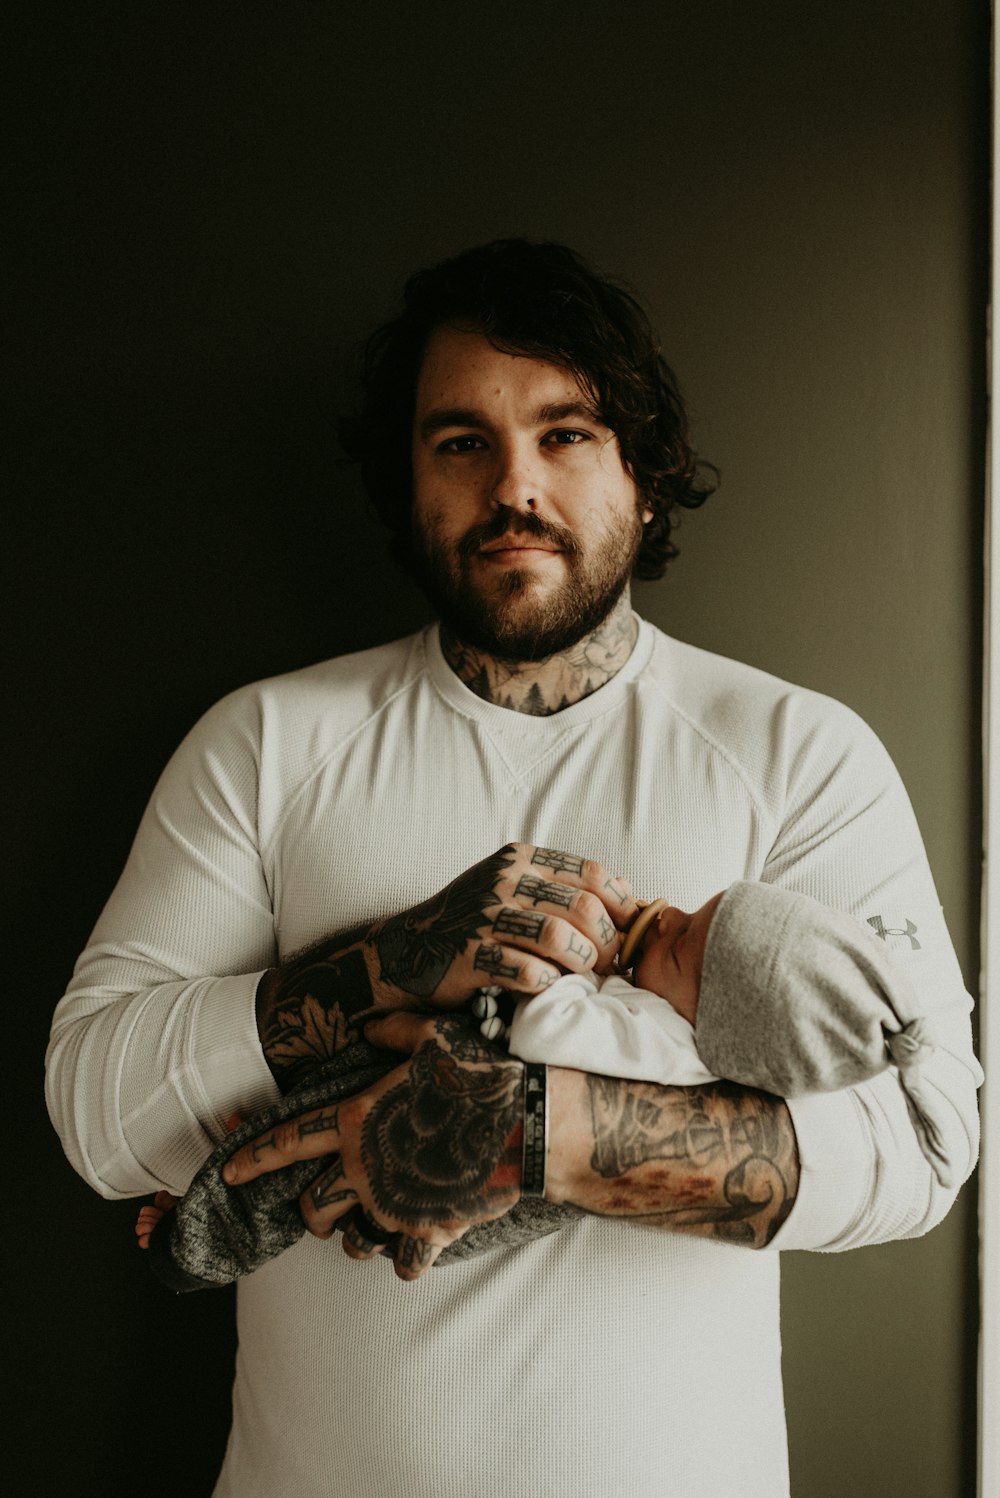 man in white crew neck t-shirt with tattoo on arm